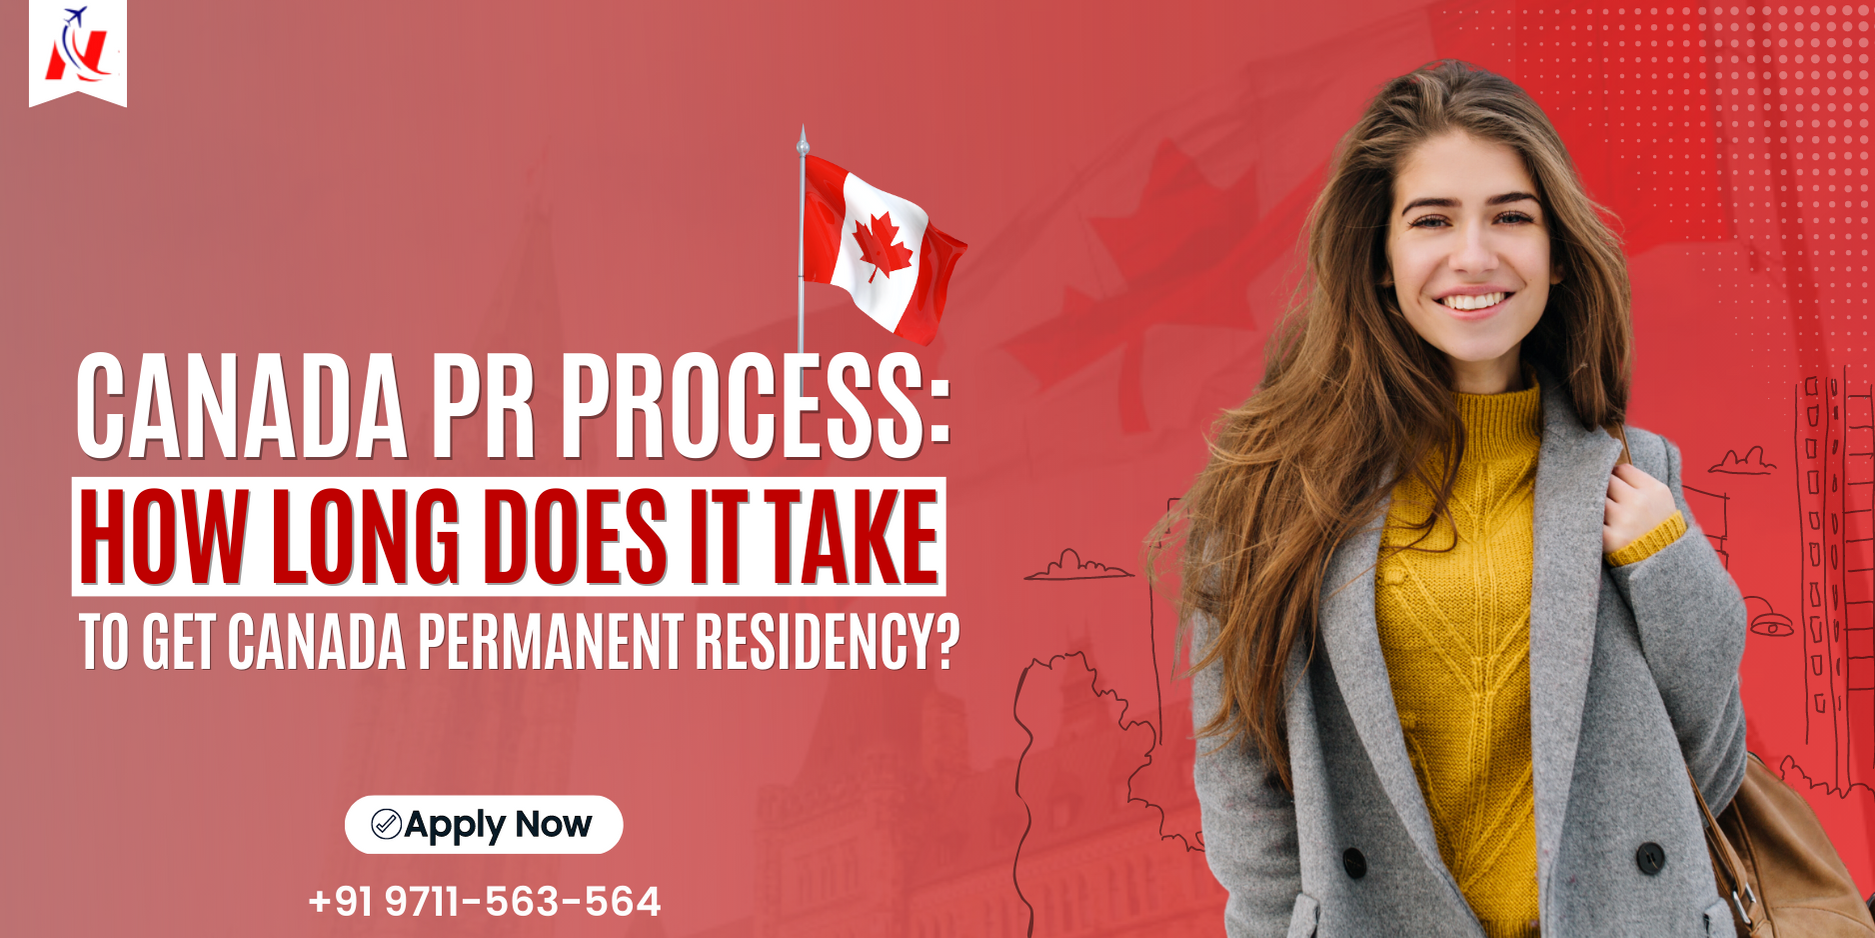 Canada PR Process: How Long Does It Take to Get Canada Permanent Residency?